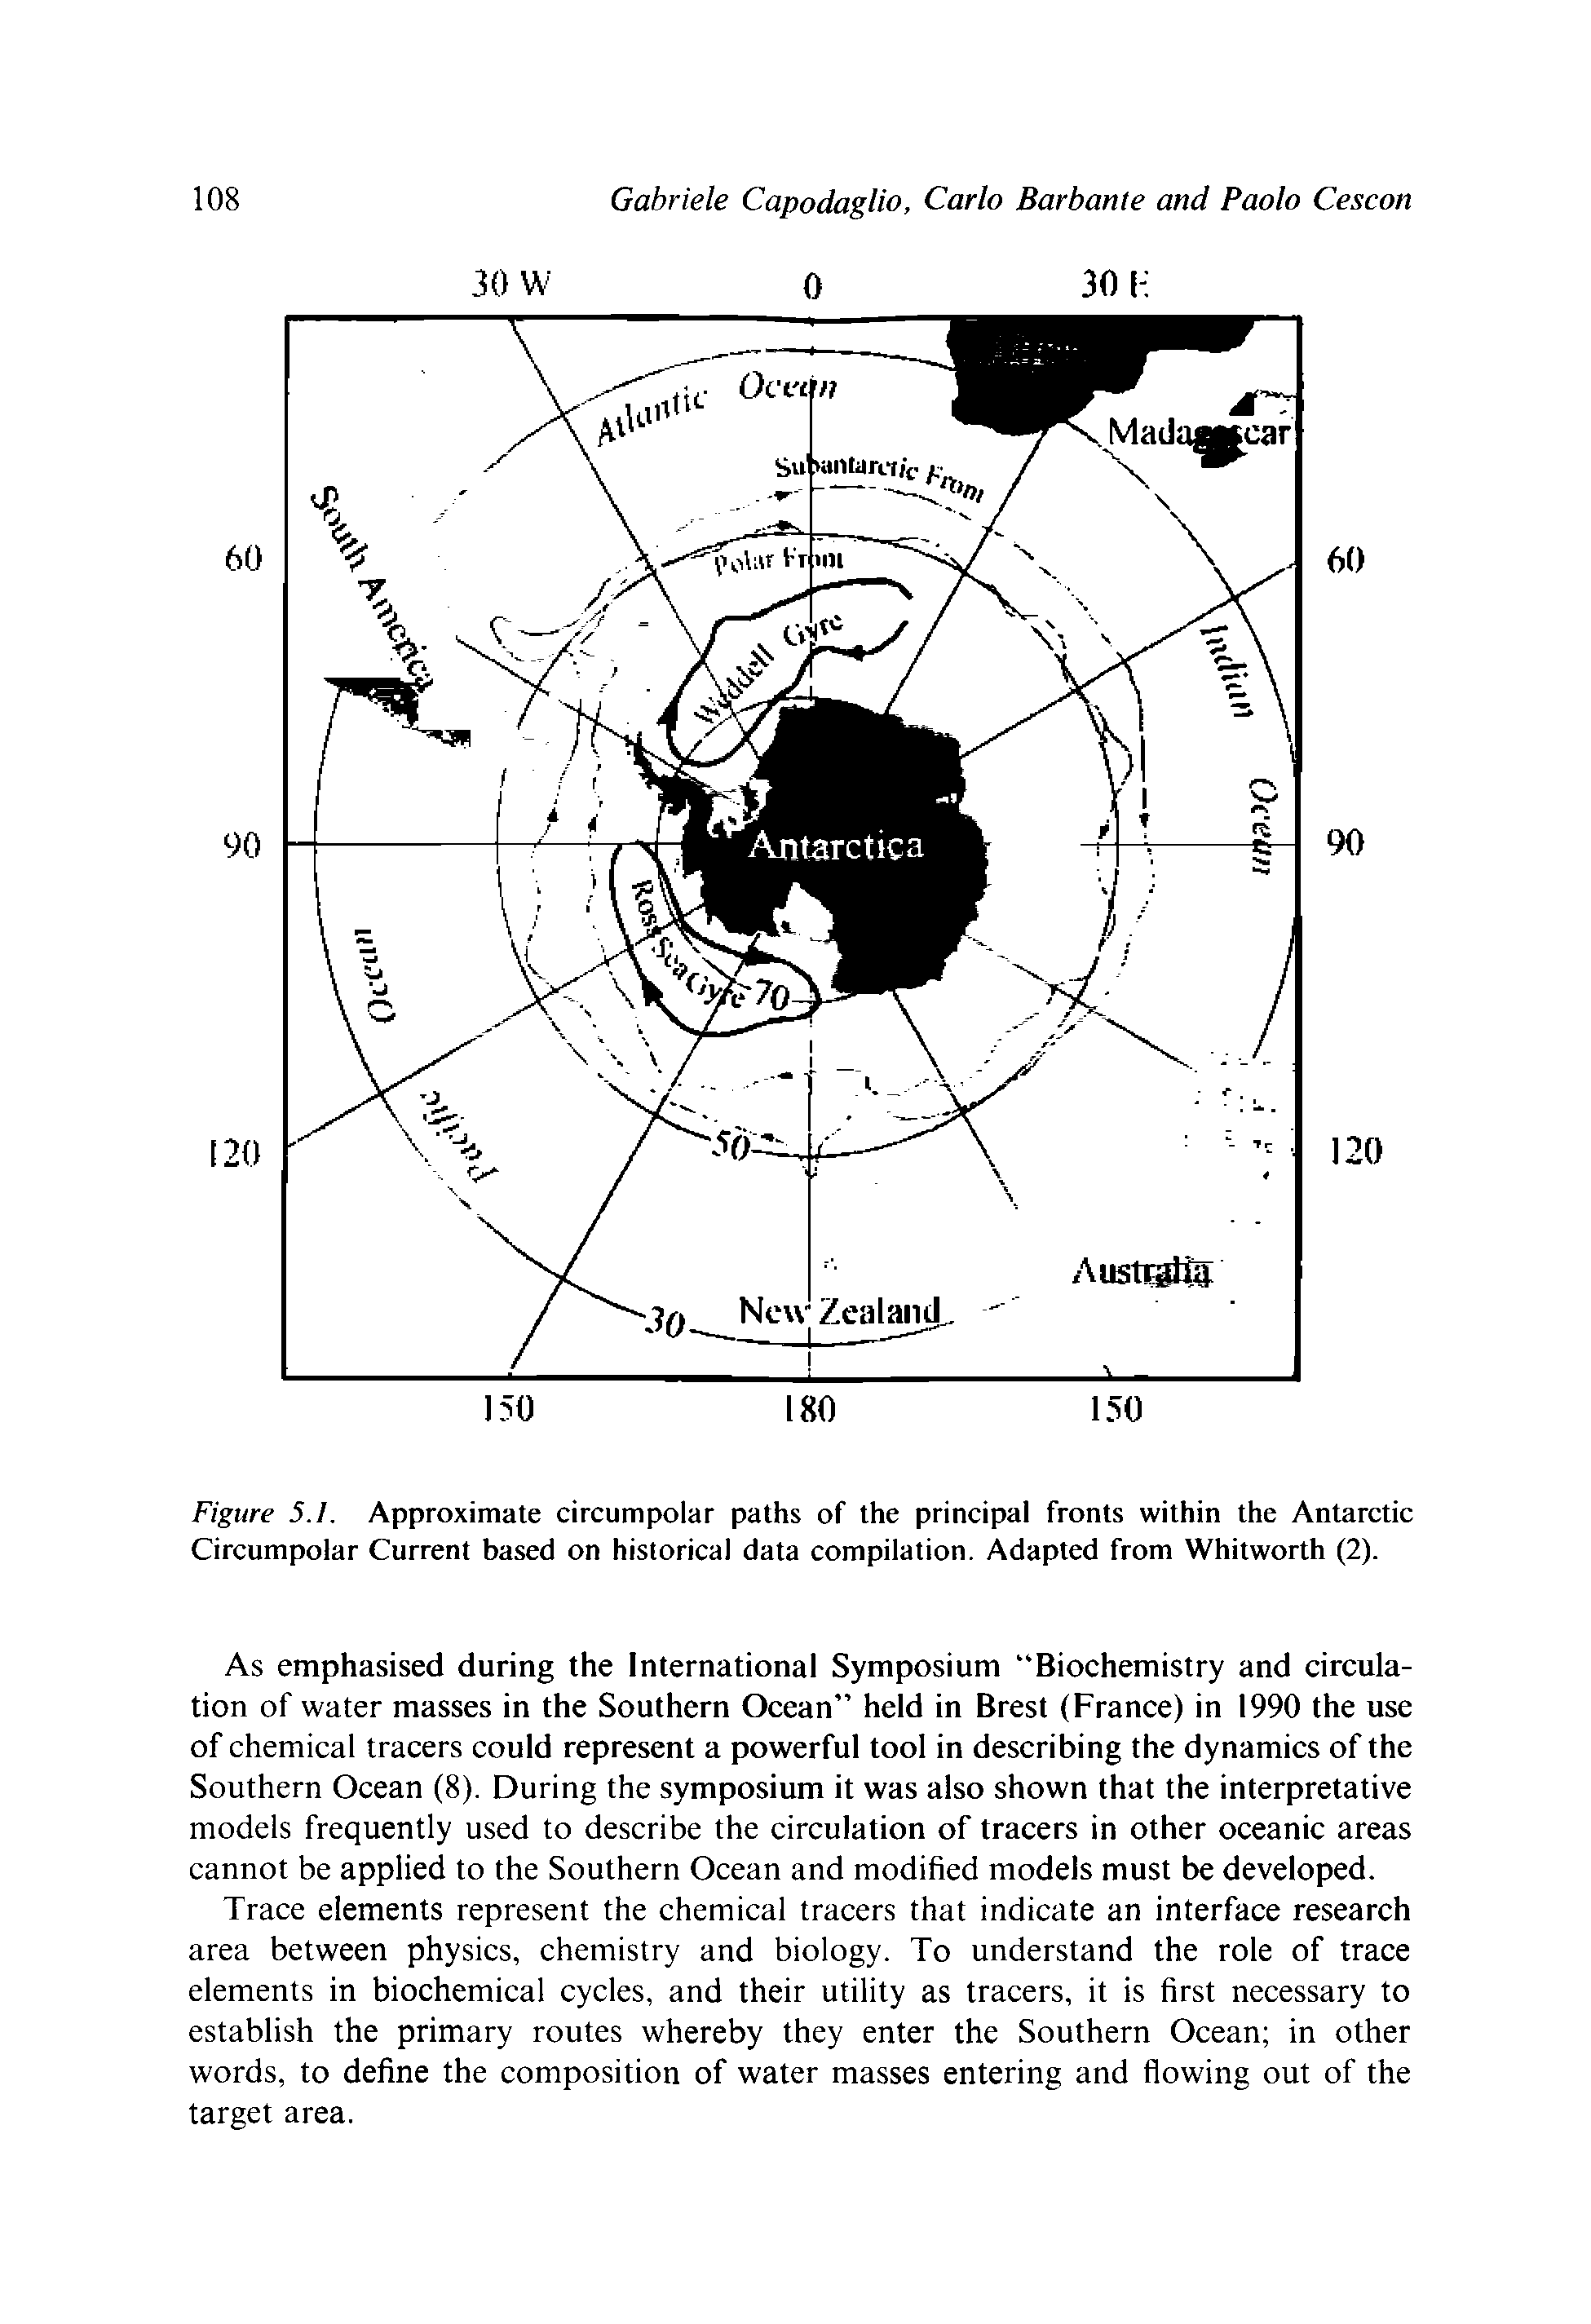 Figure 5.1. Approximate circumpolar paths of the principal fronts within the Antarctic Circumpolar Current based on historical data compilation. Adapted from Whitworth (2).